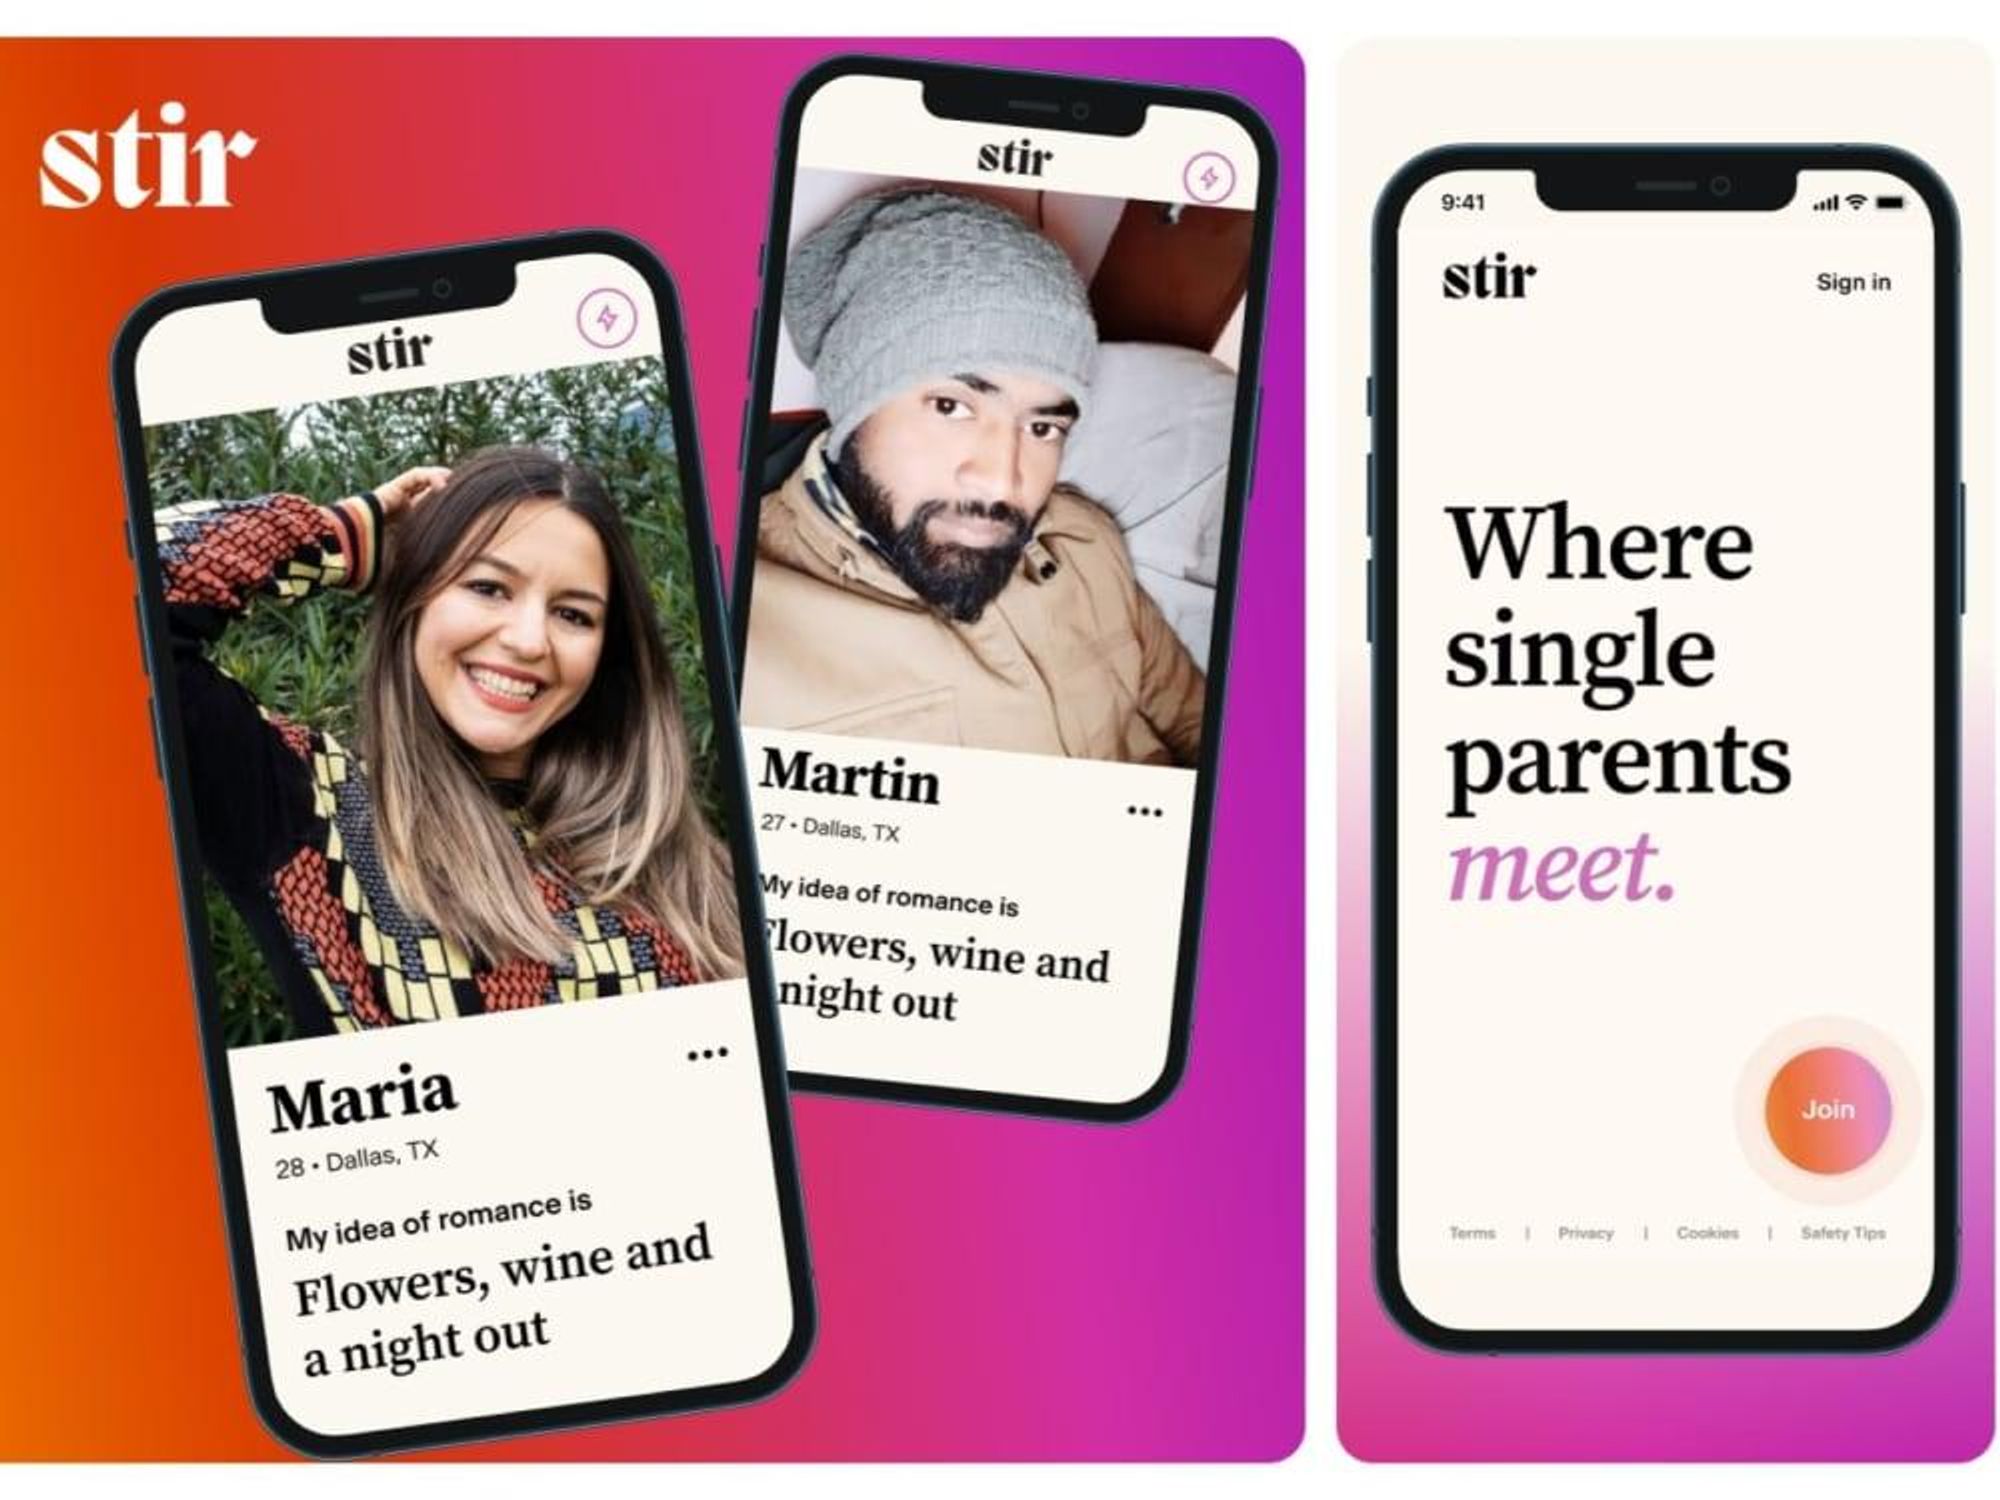 New Tinder 'Blind Date' Feature Brings Back the Old-School Experience